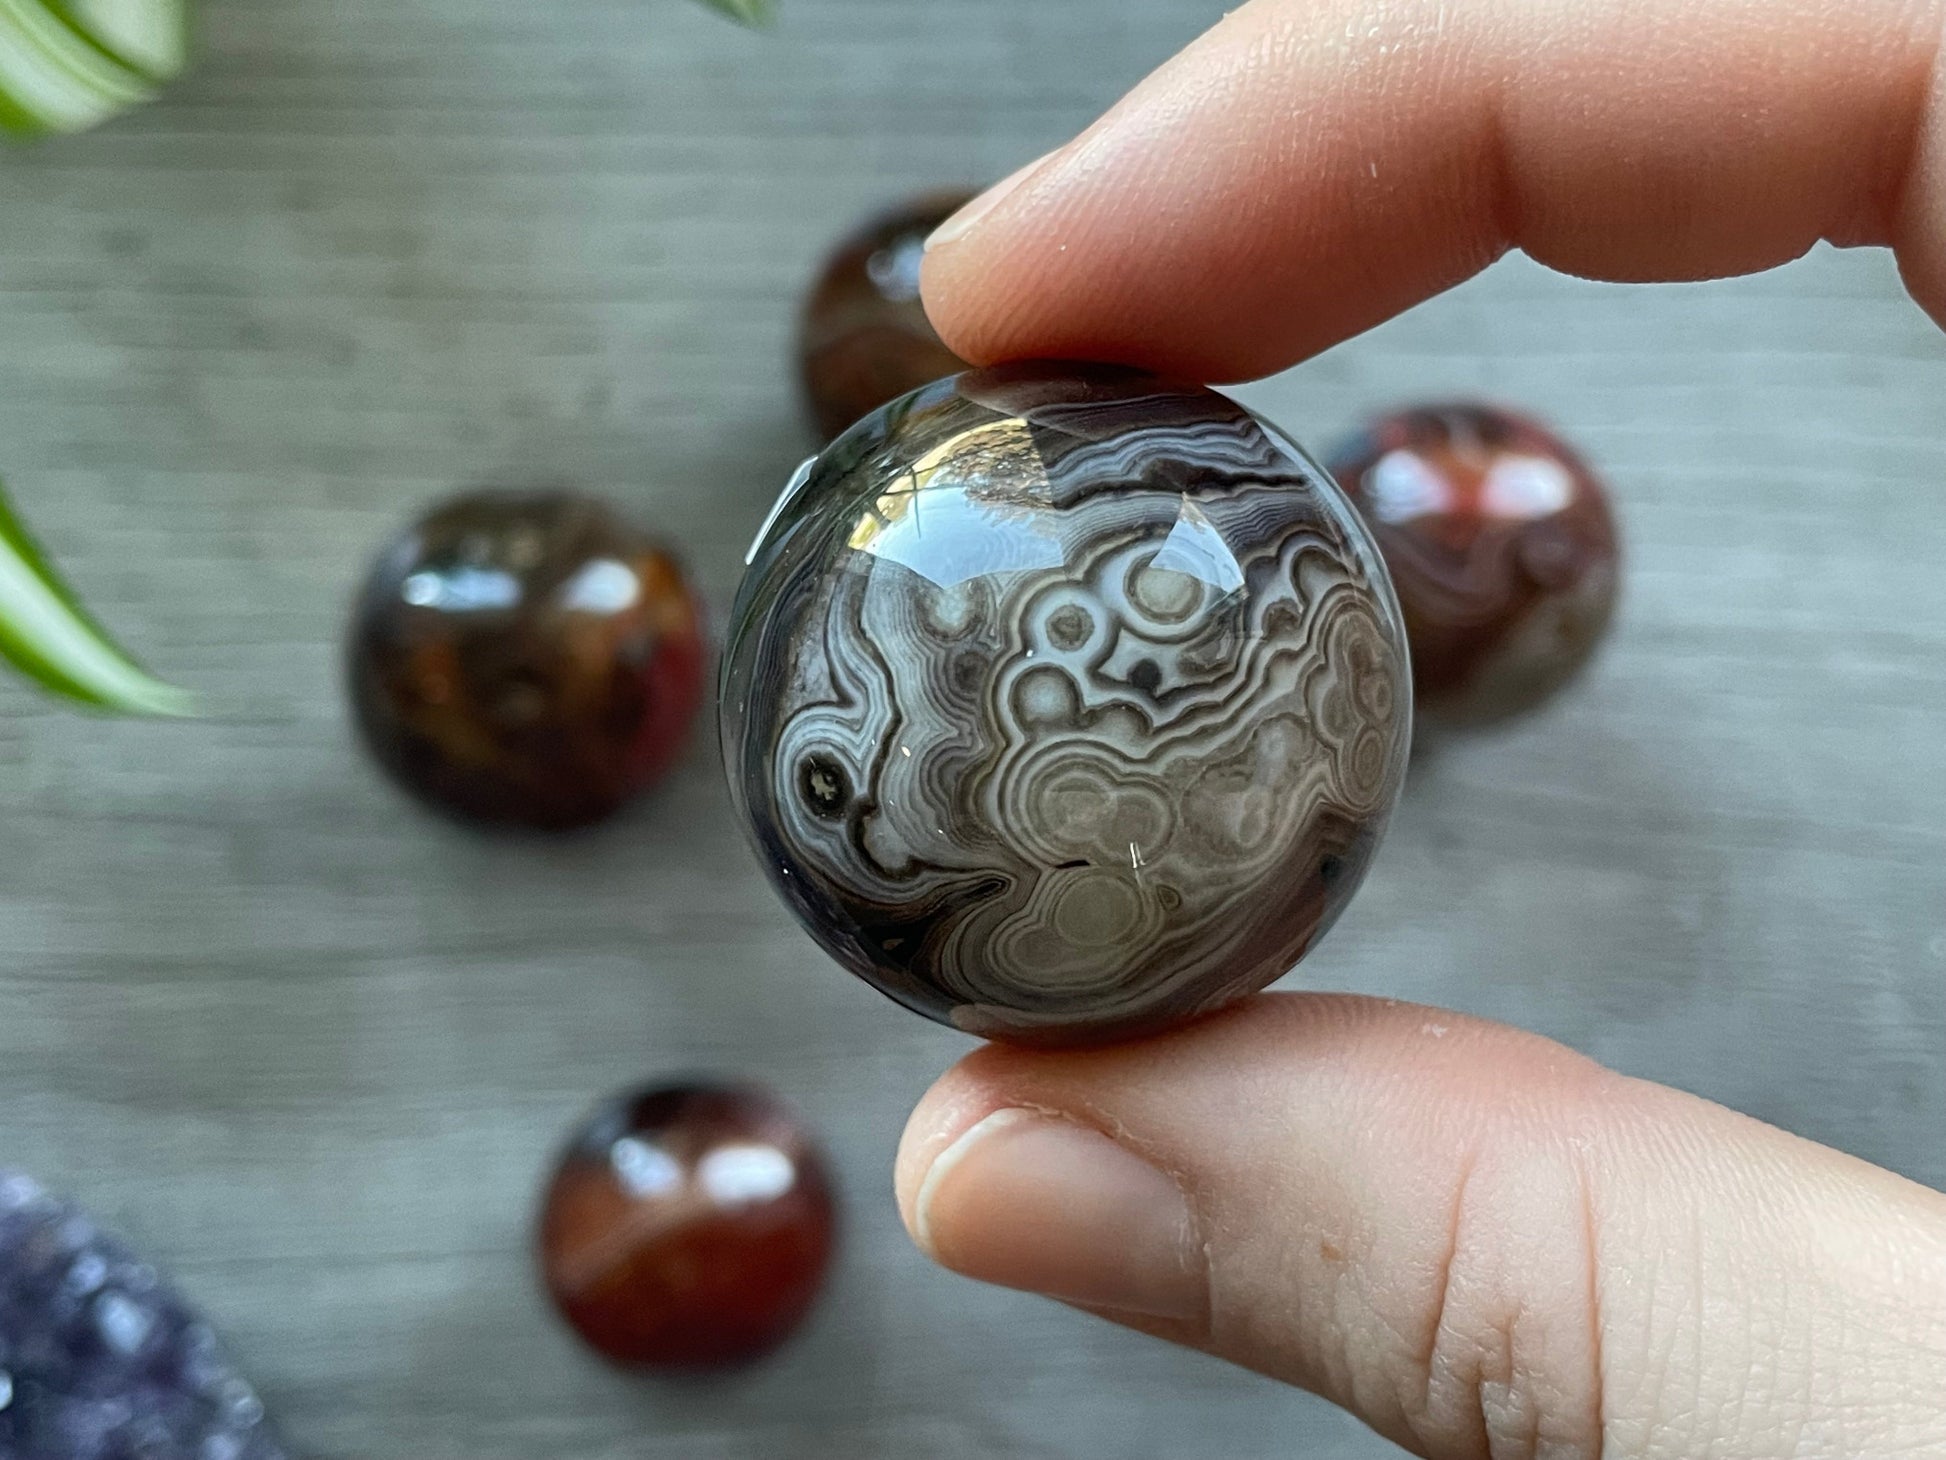 Pictured is a sphere carved out of sardonyx agate.